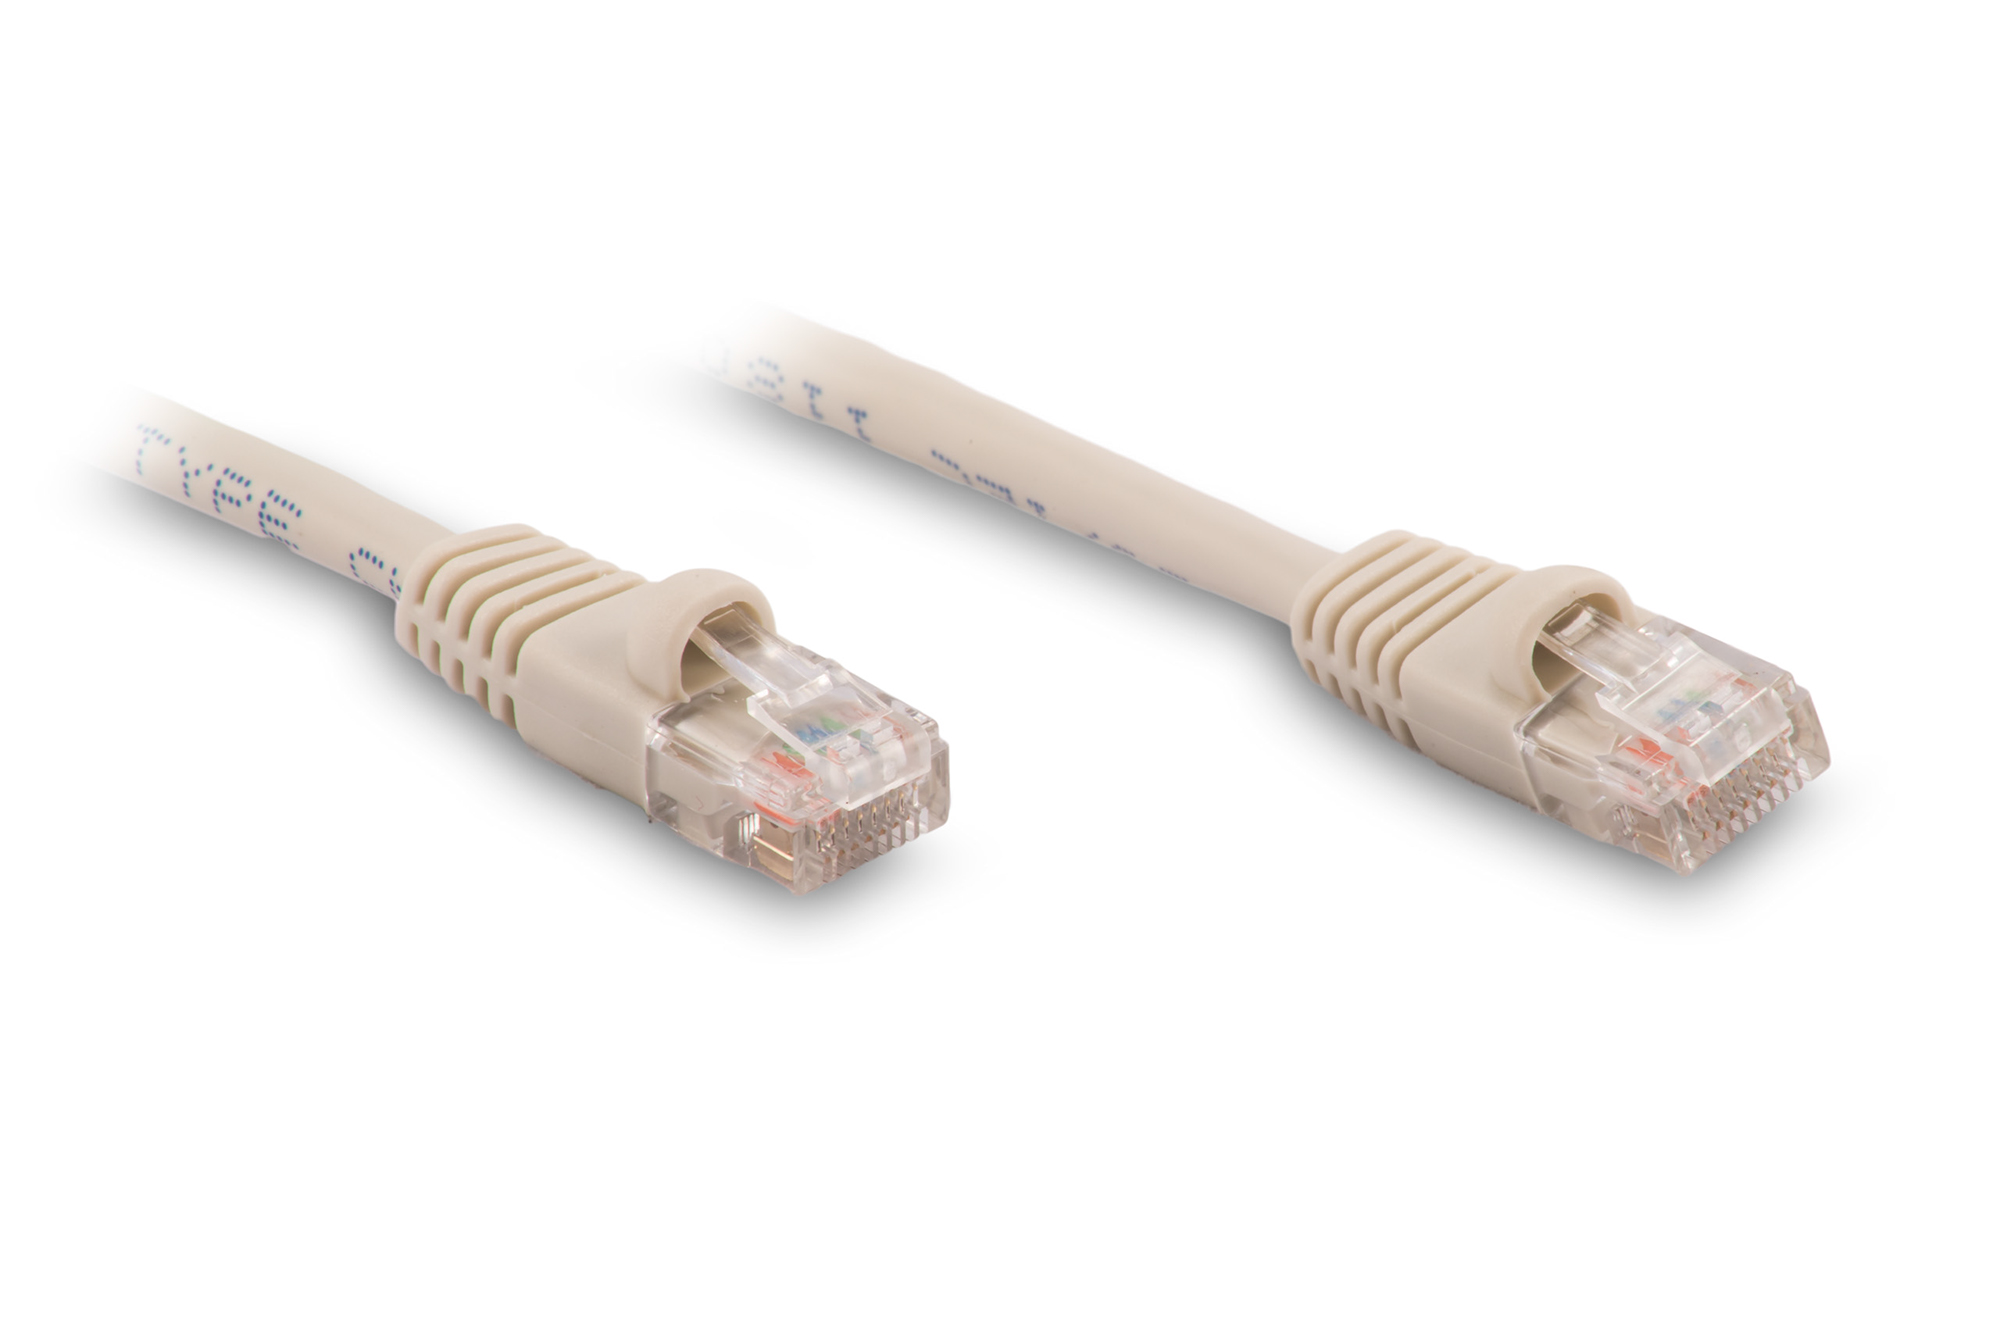 25ft Cat5e Ethernet Patch Cable - Gray Color - Snagless Boot, Stranded, RJ45, 350Mhz, 24AWG